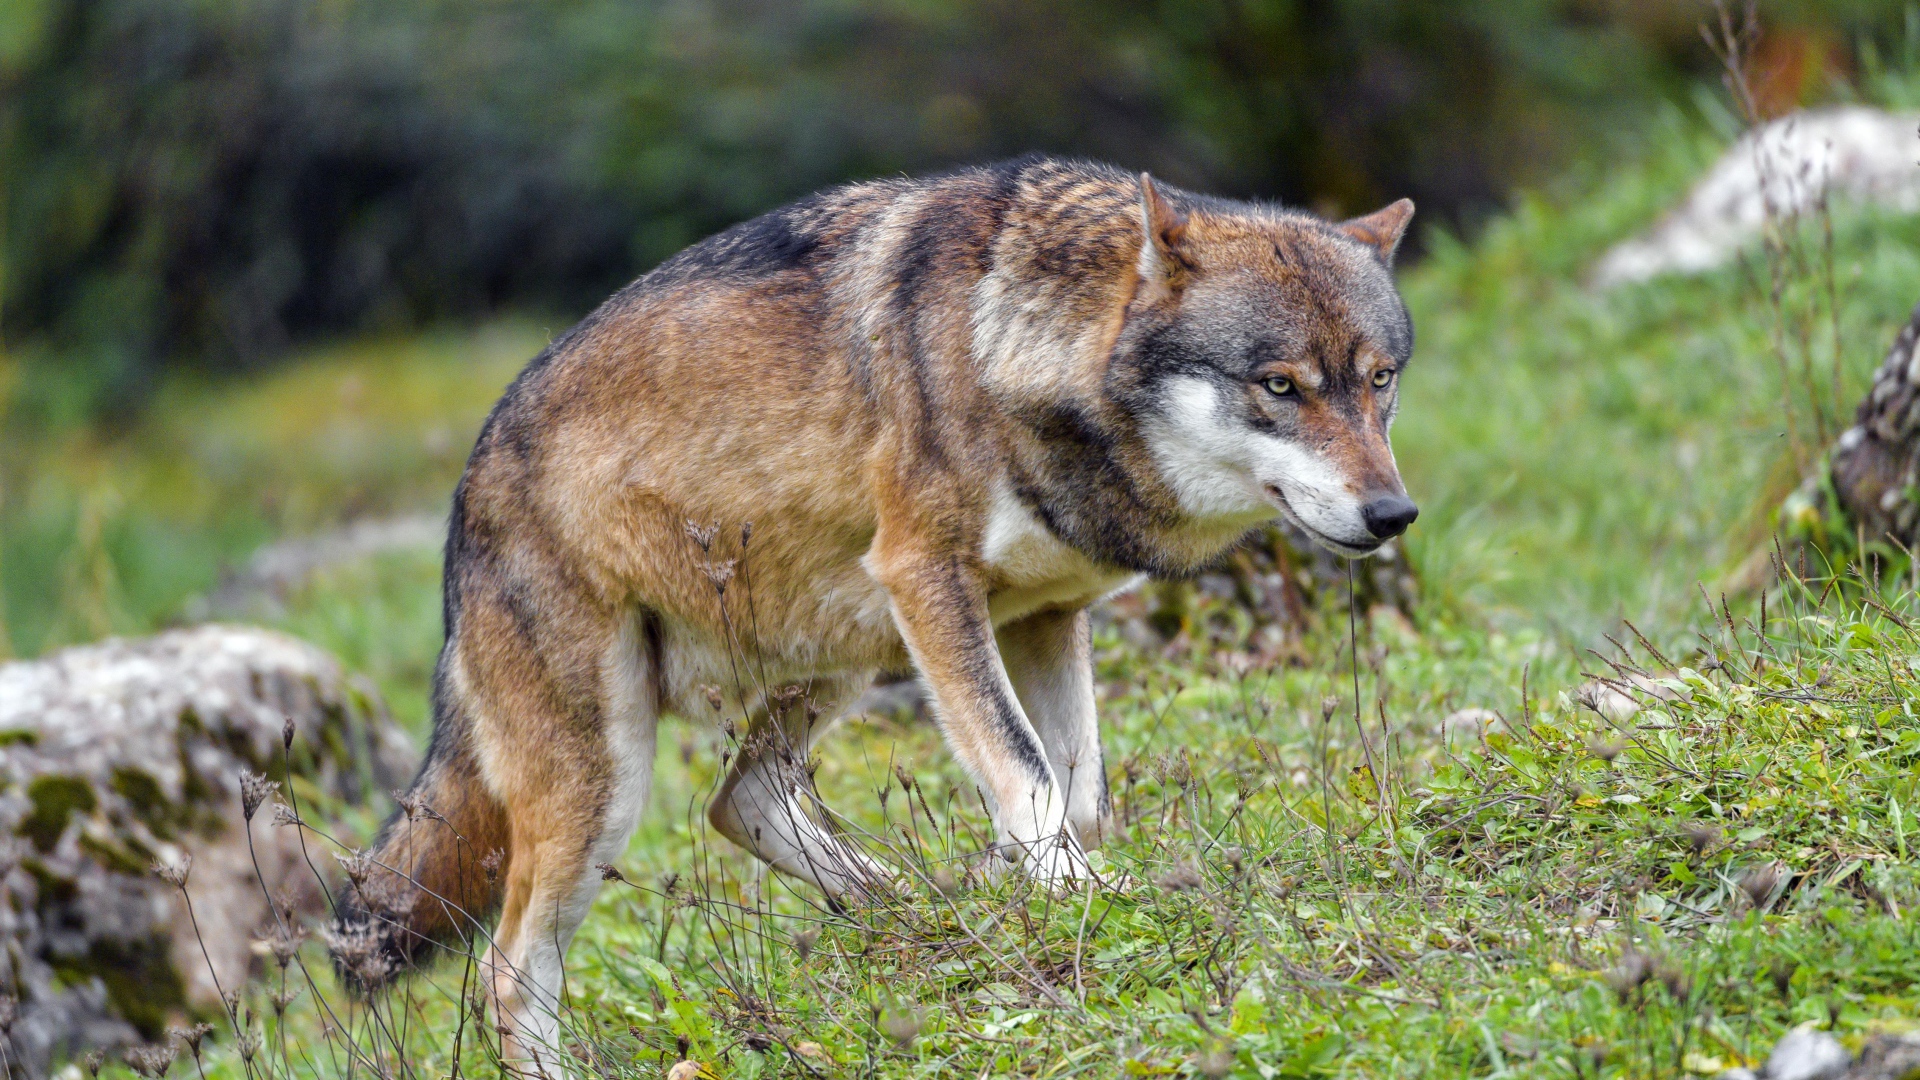 A large stern gray wolf walks through the grass